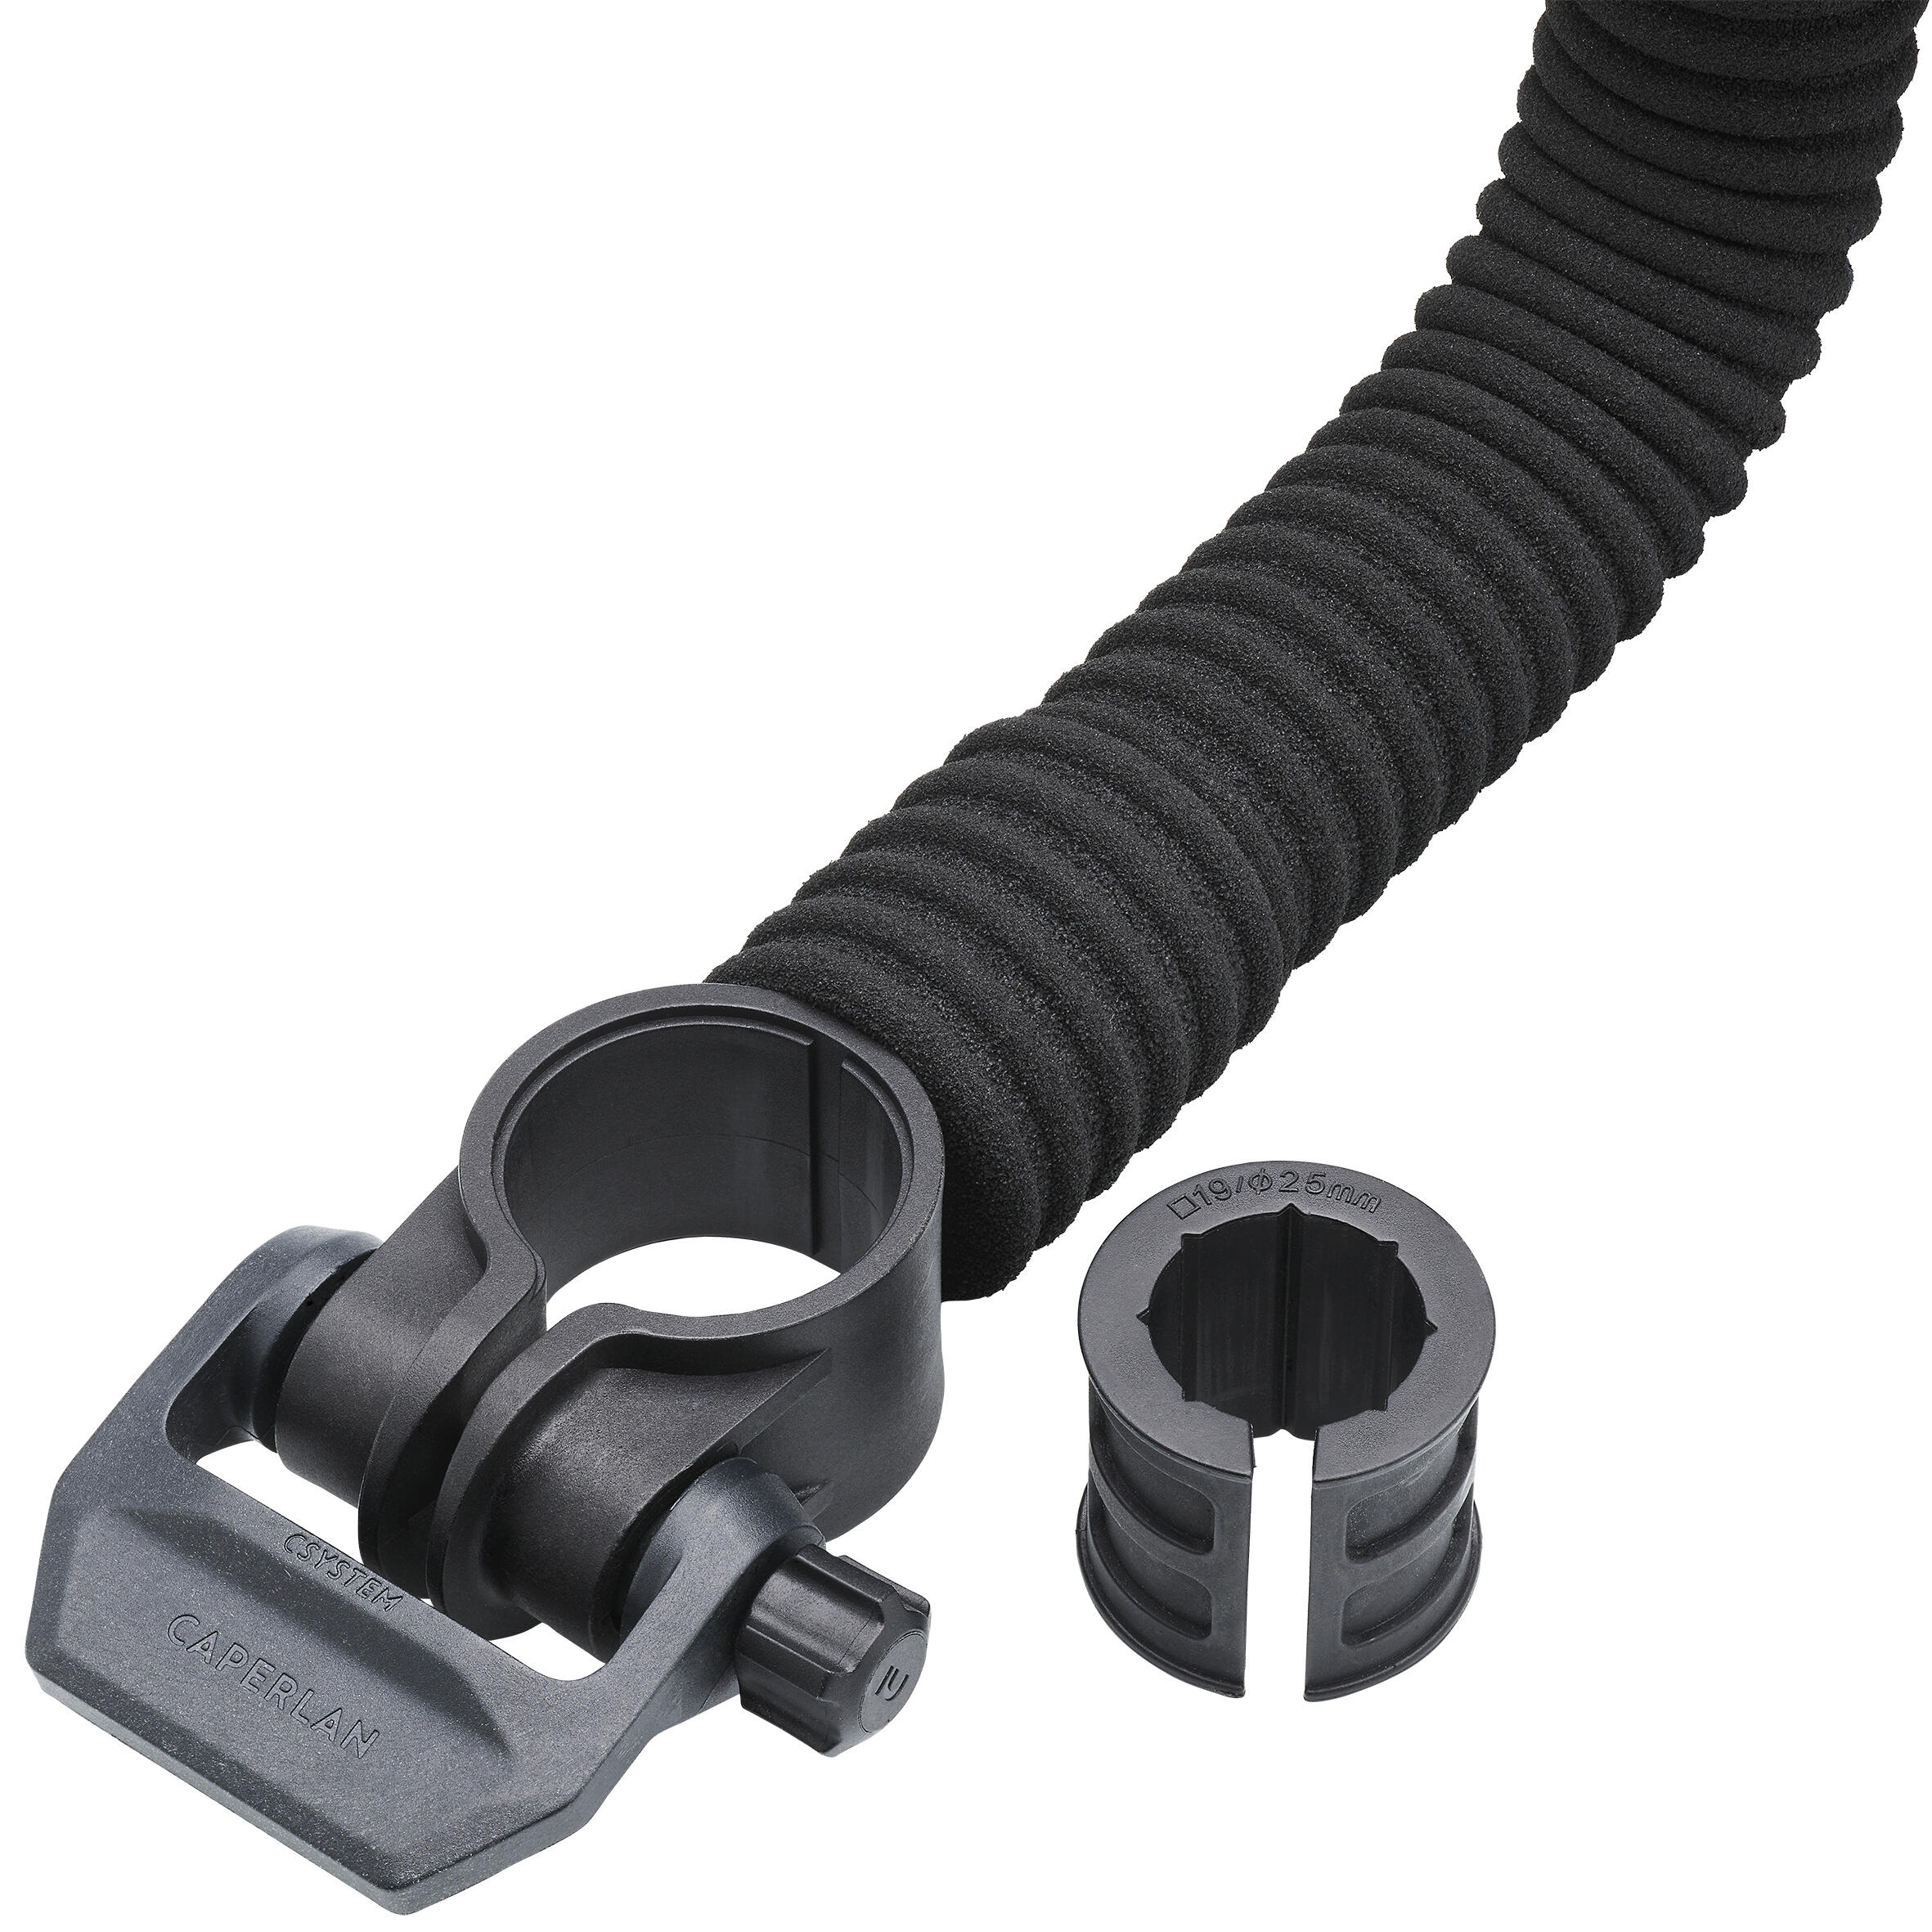 INNOVATIVE REAR ROD REST FOR CSB BPS D25 D36 FISHING STATIONS 5/5